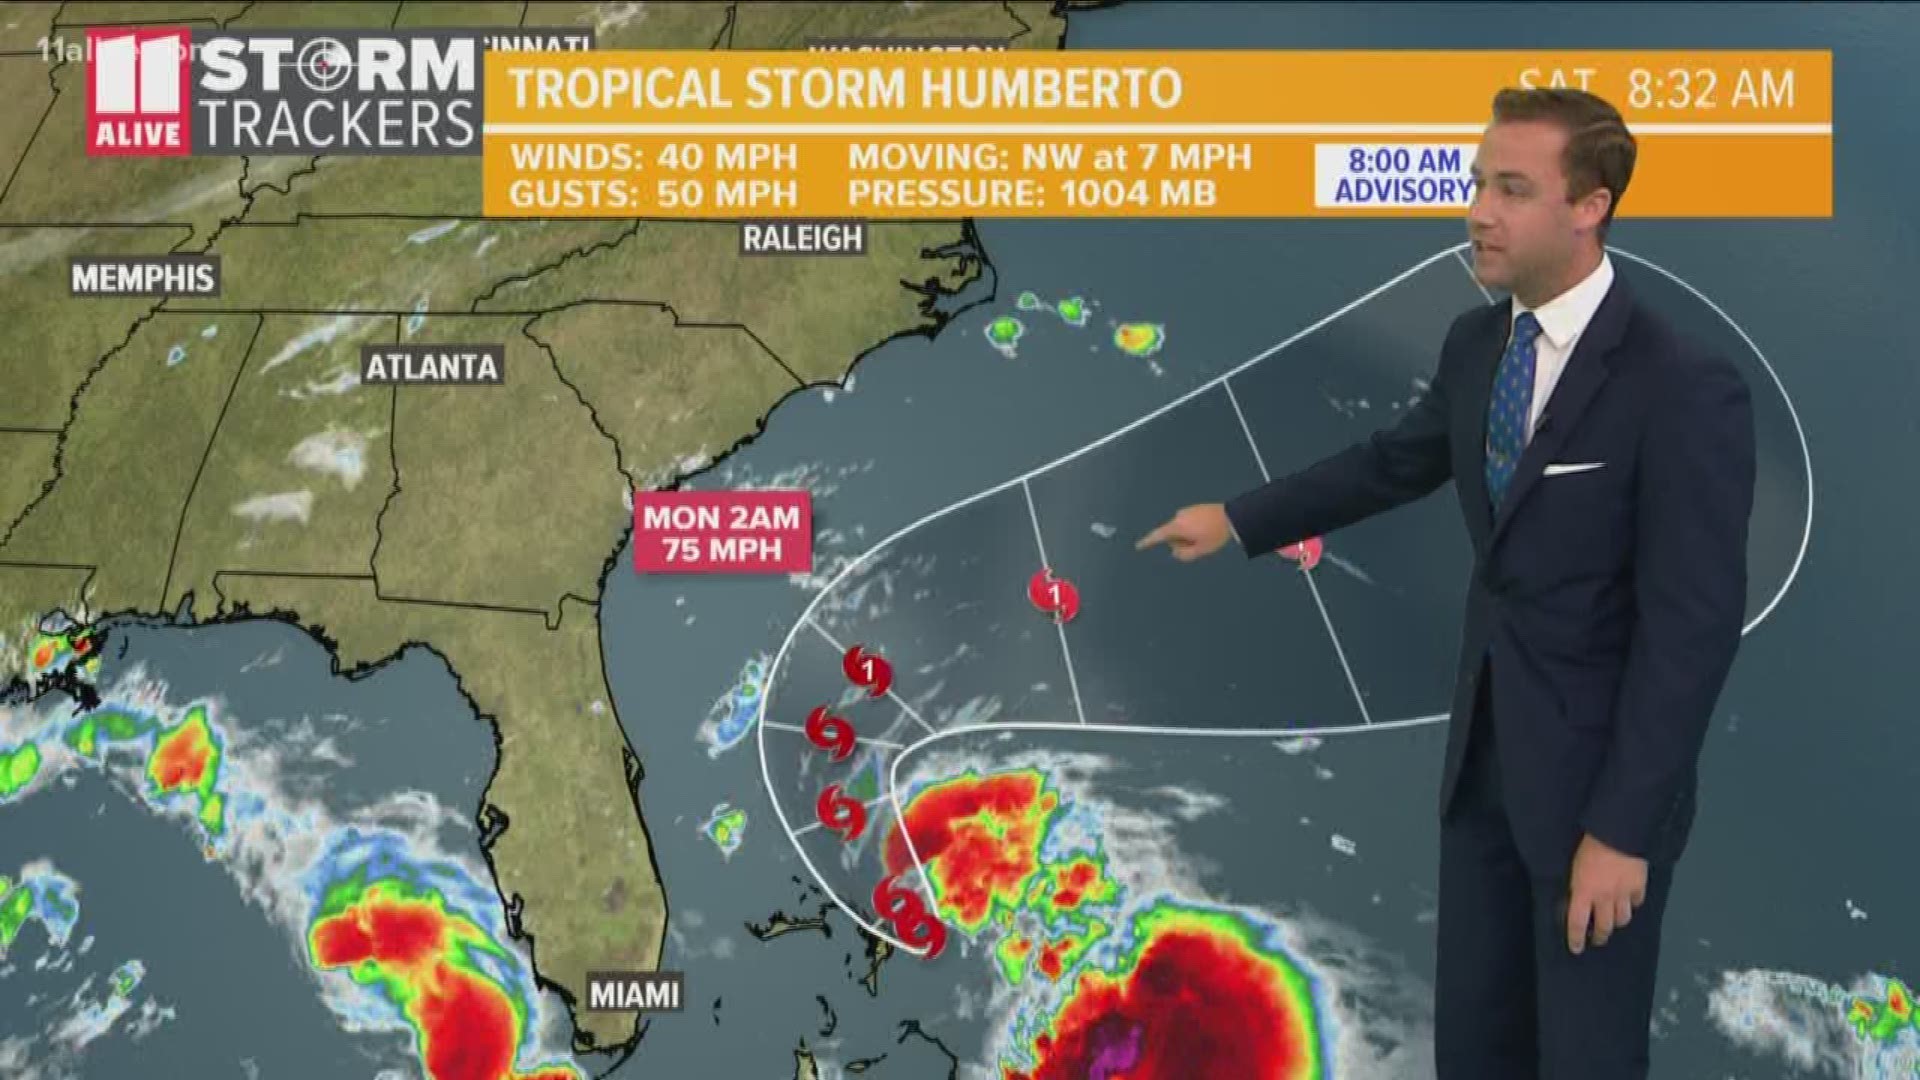 A quick look at how Tropical Storm Humberto may affect the southeastern United States early Saturday morning.